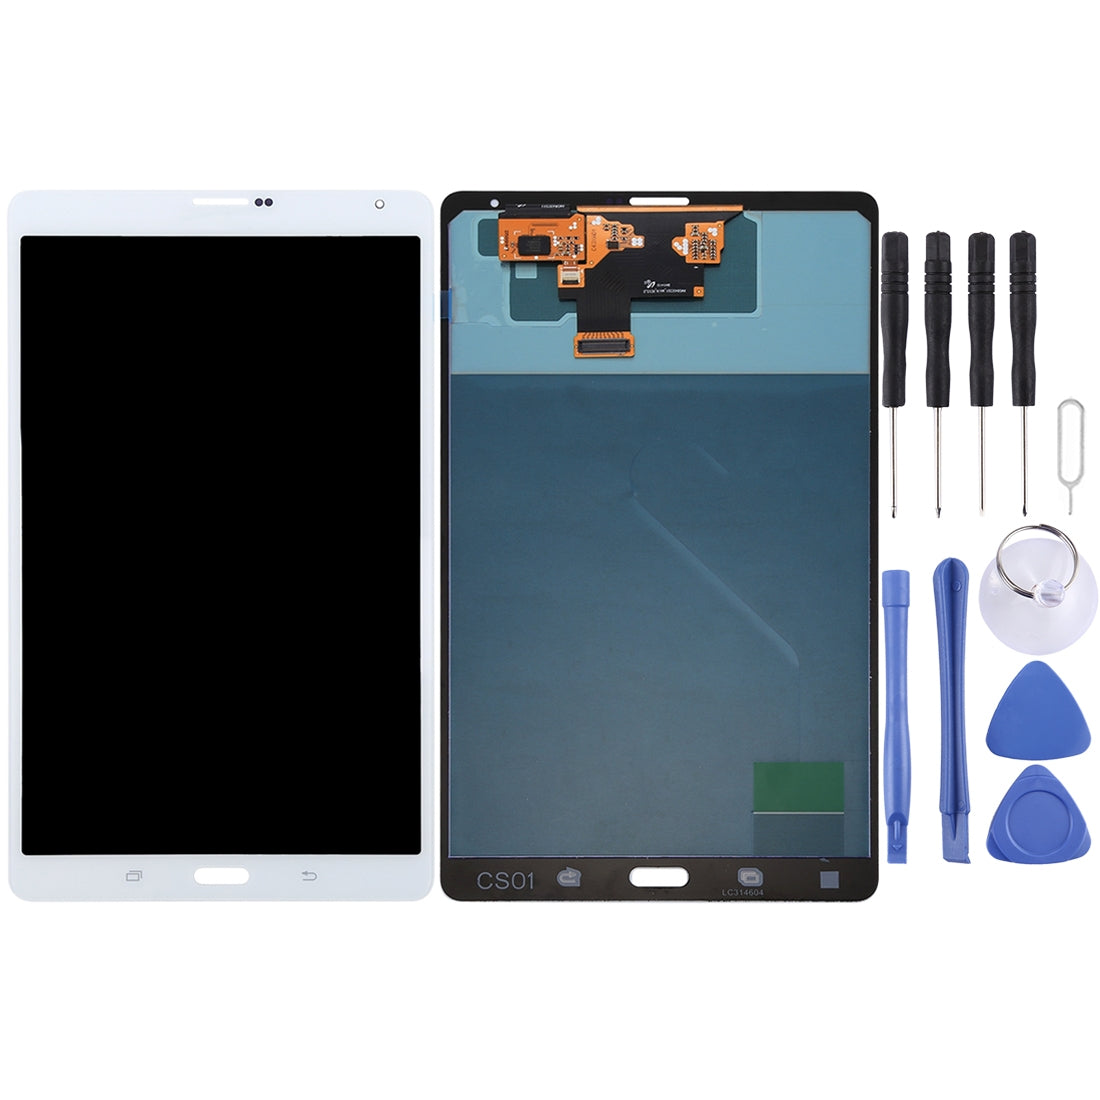 LCD Screen + Touch Digitizer Samsung Galaxy Tab S 8.4 LTE T705 White